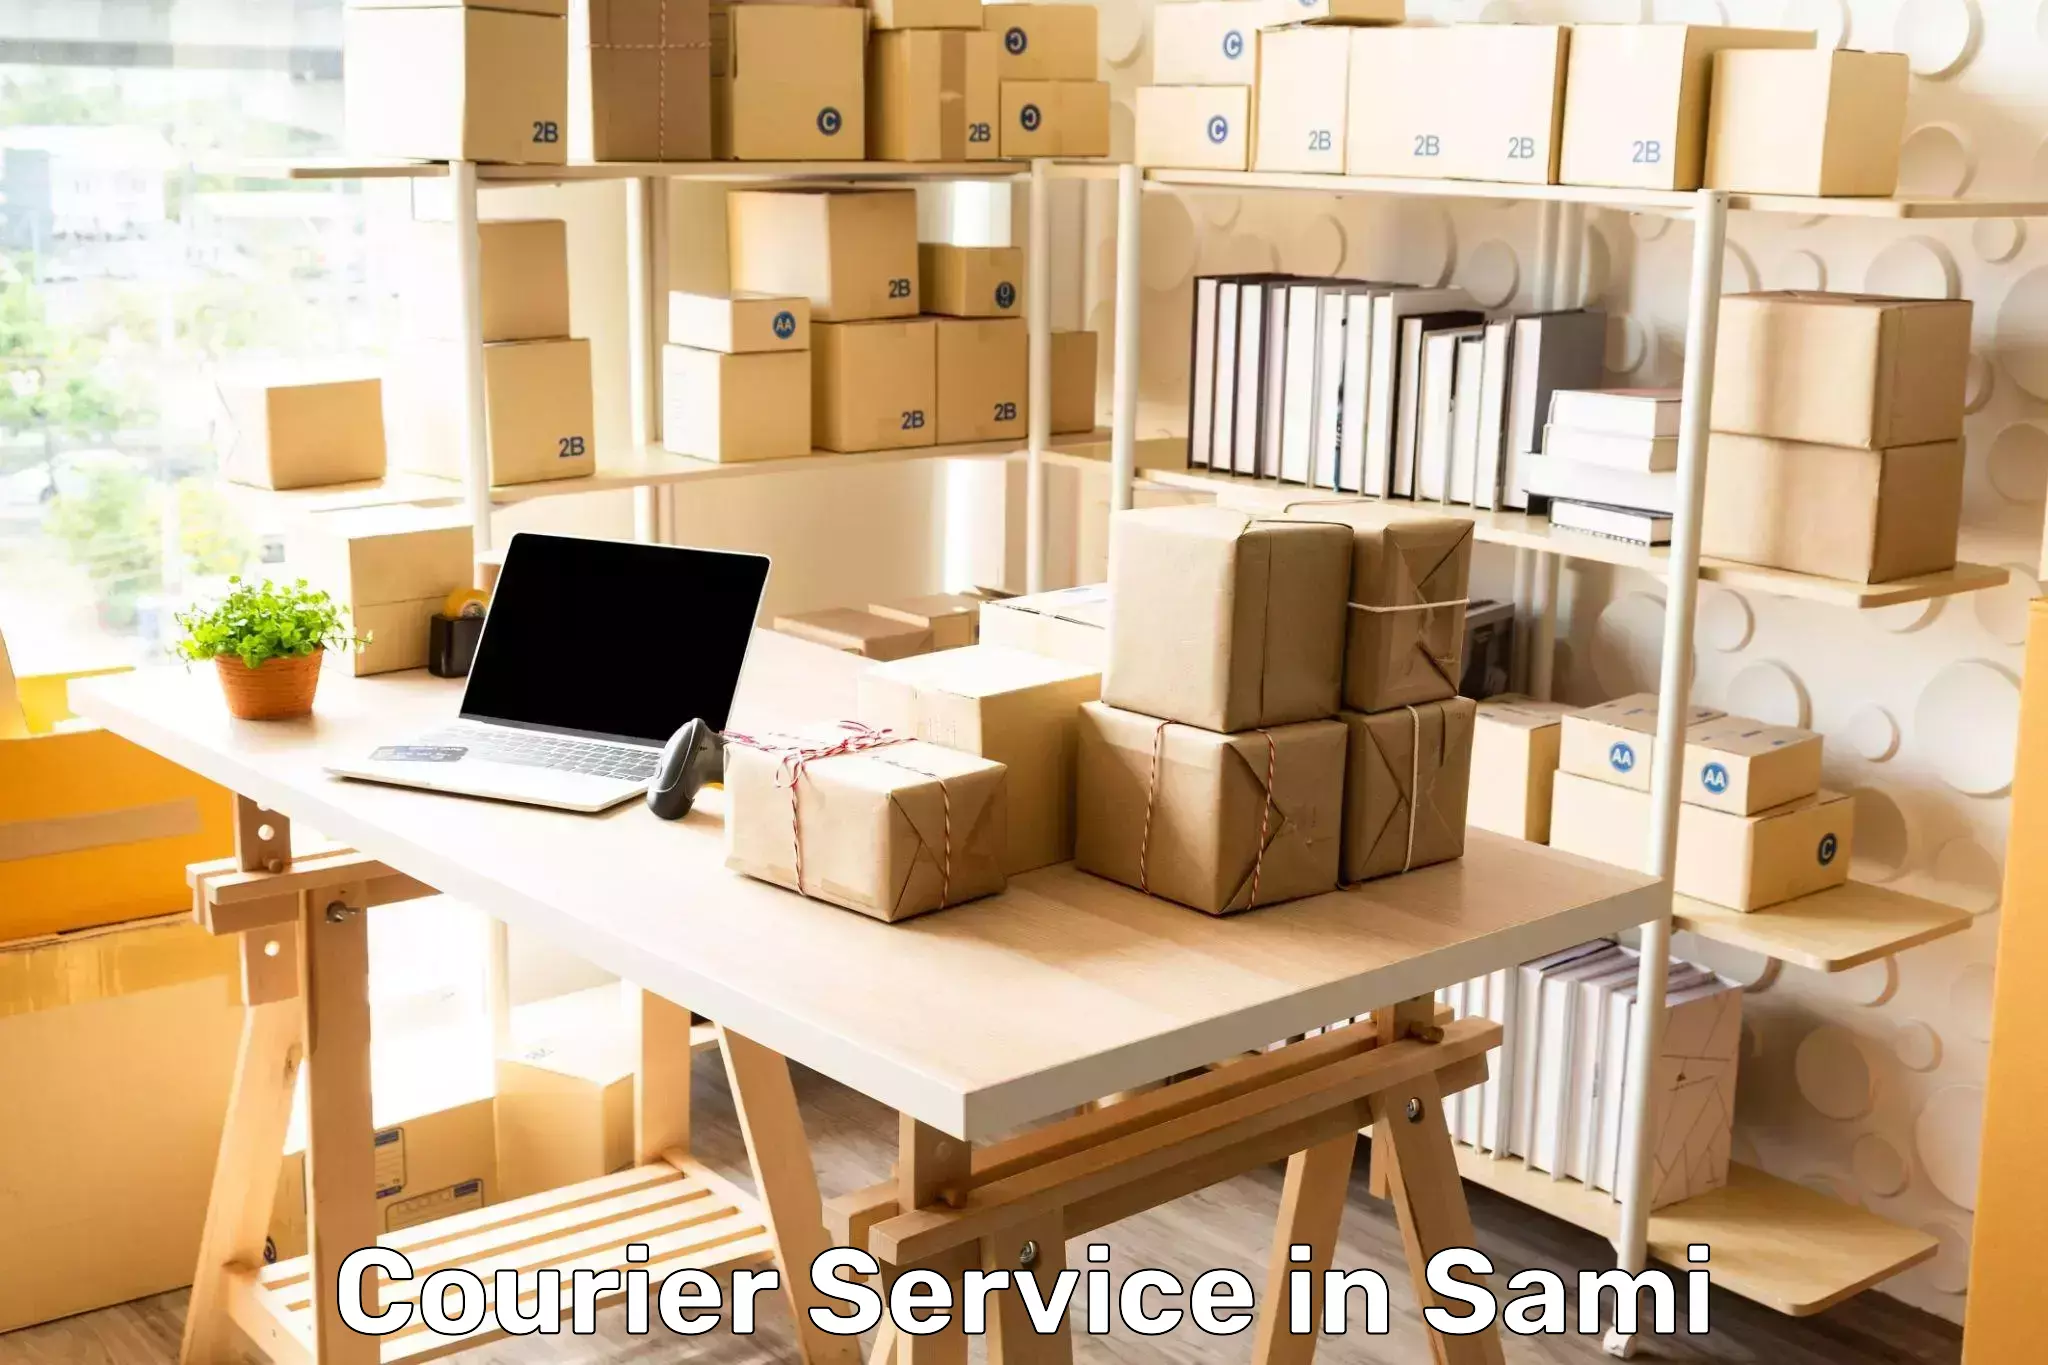 Courier insurance in Sami